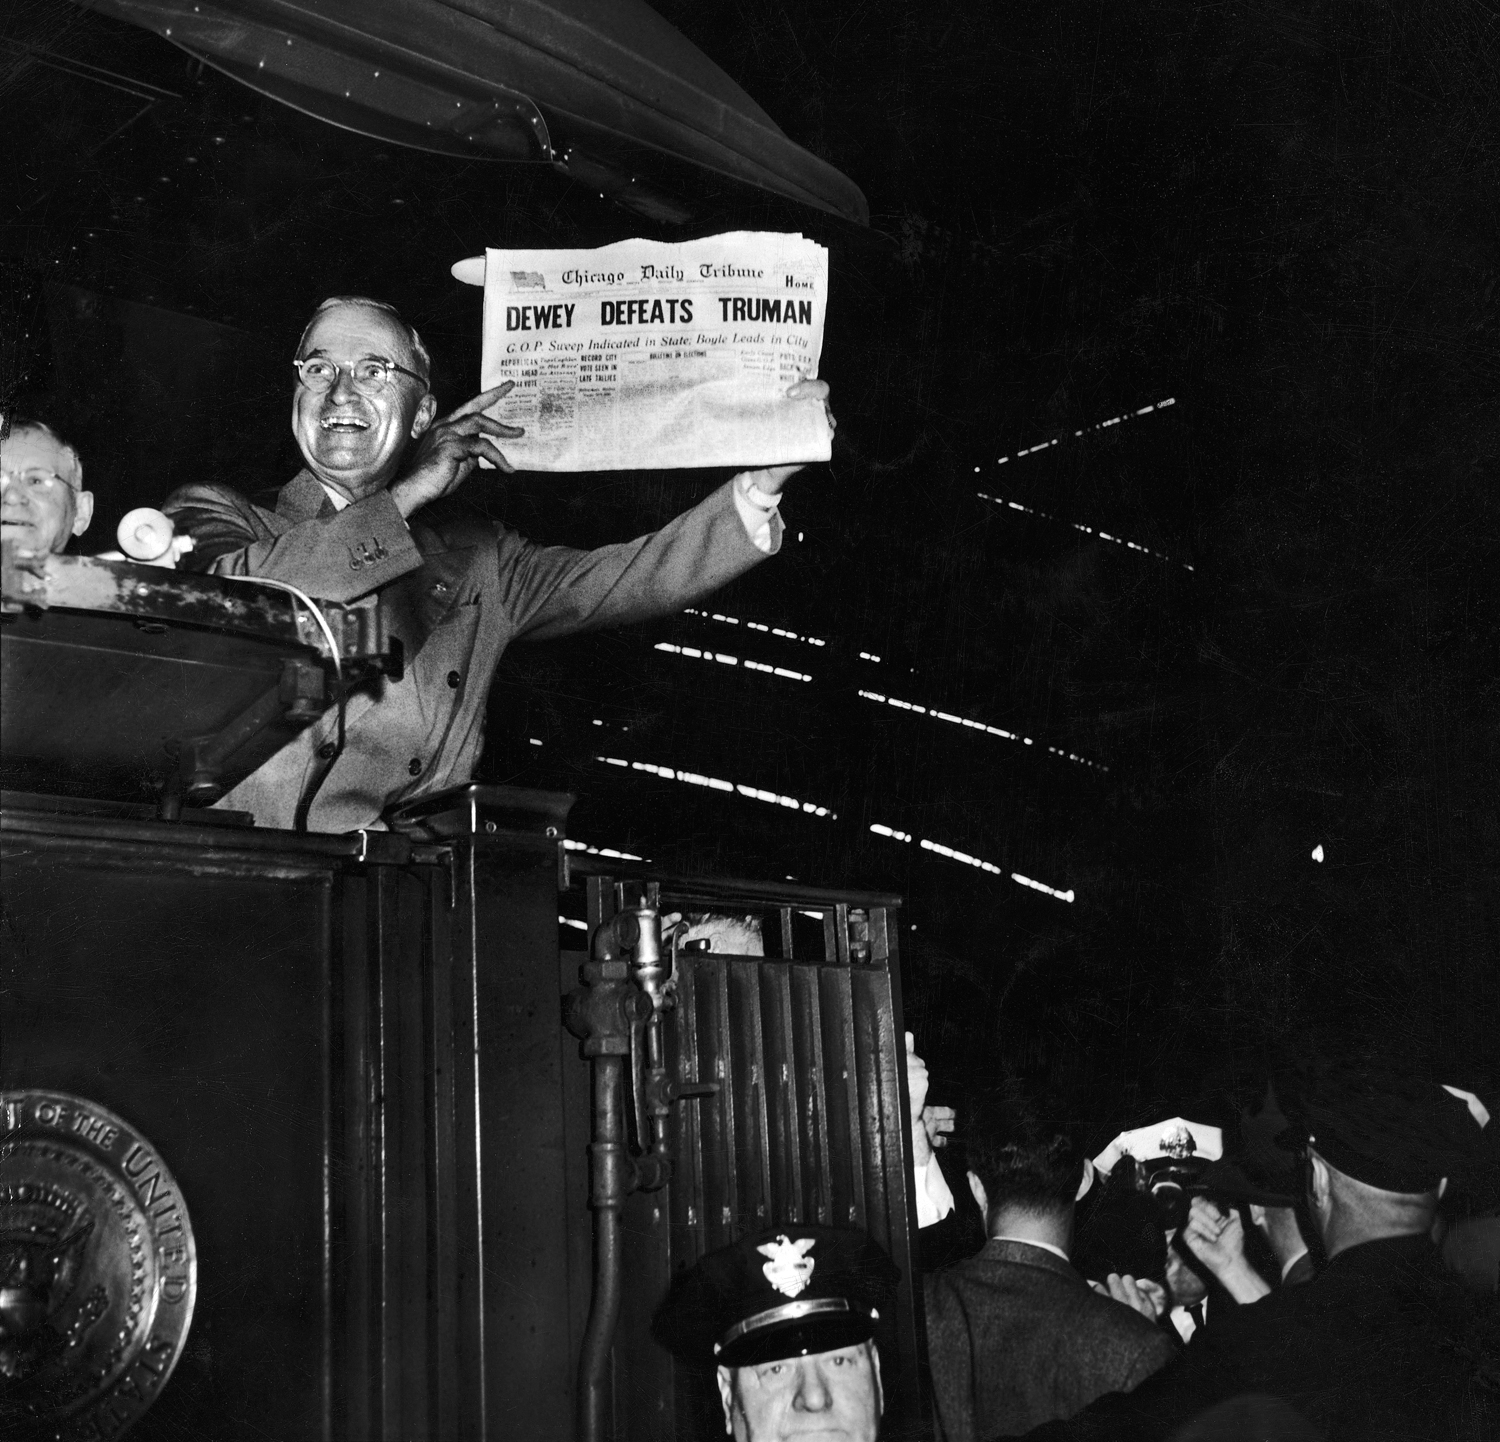 President Harry Truman jubilantly holds up a Chicago newspaper emblazoned with the (erroneous) headline, DEWEY DEFEATS TRUMAN. In fact, Truman handily beat New York governor Thomas Dewey in the tight 1948 presidential election.